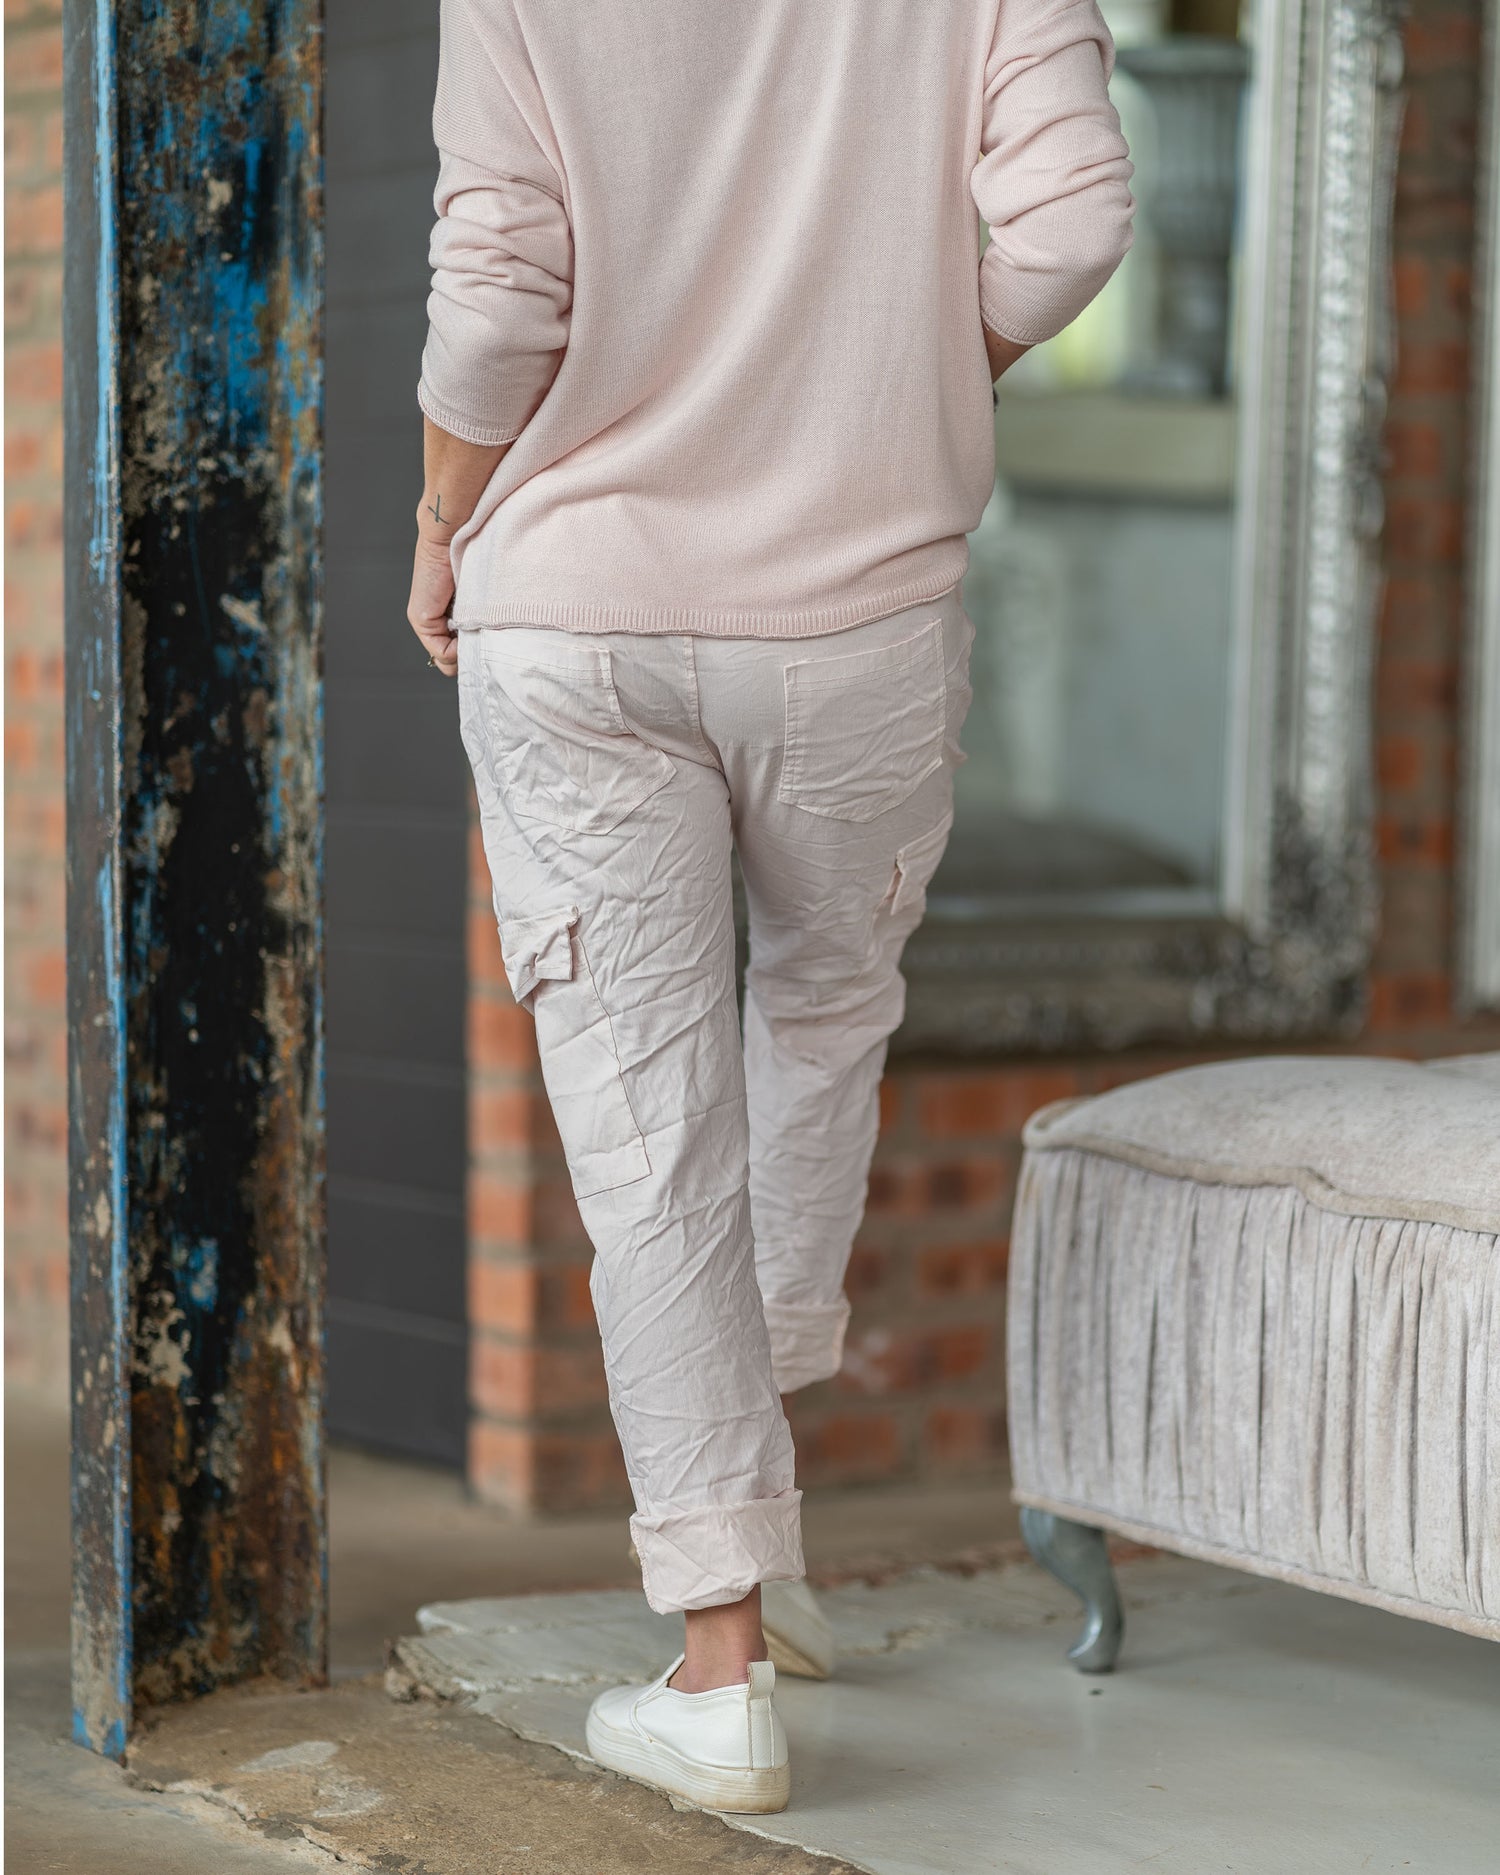 There is nothing "plain" about these pants - our elasticated drawstring pants with a button-up feature. Deep side pockets for practicality, these pants strike the perfect balance between style and functionality. The adjustable drawstring waist ensures a personalized fit, while the classic silhouette offers versatility for any occasion